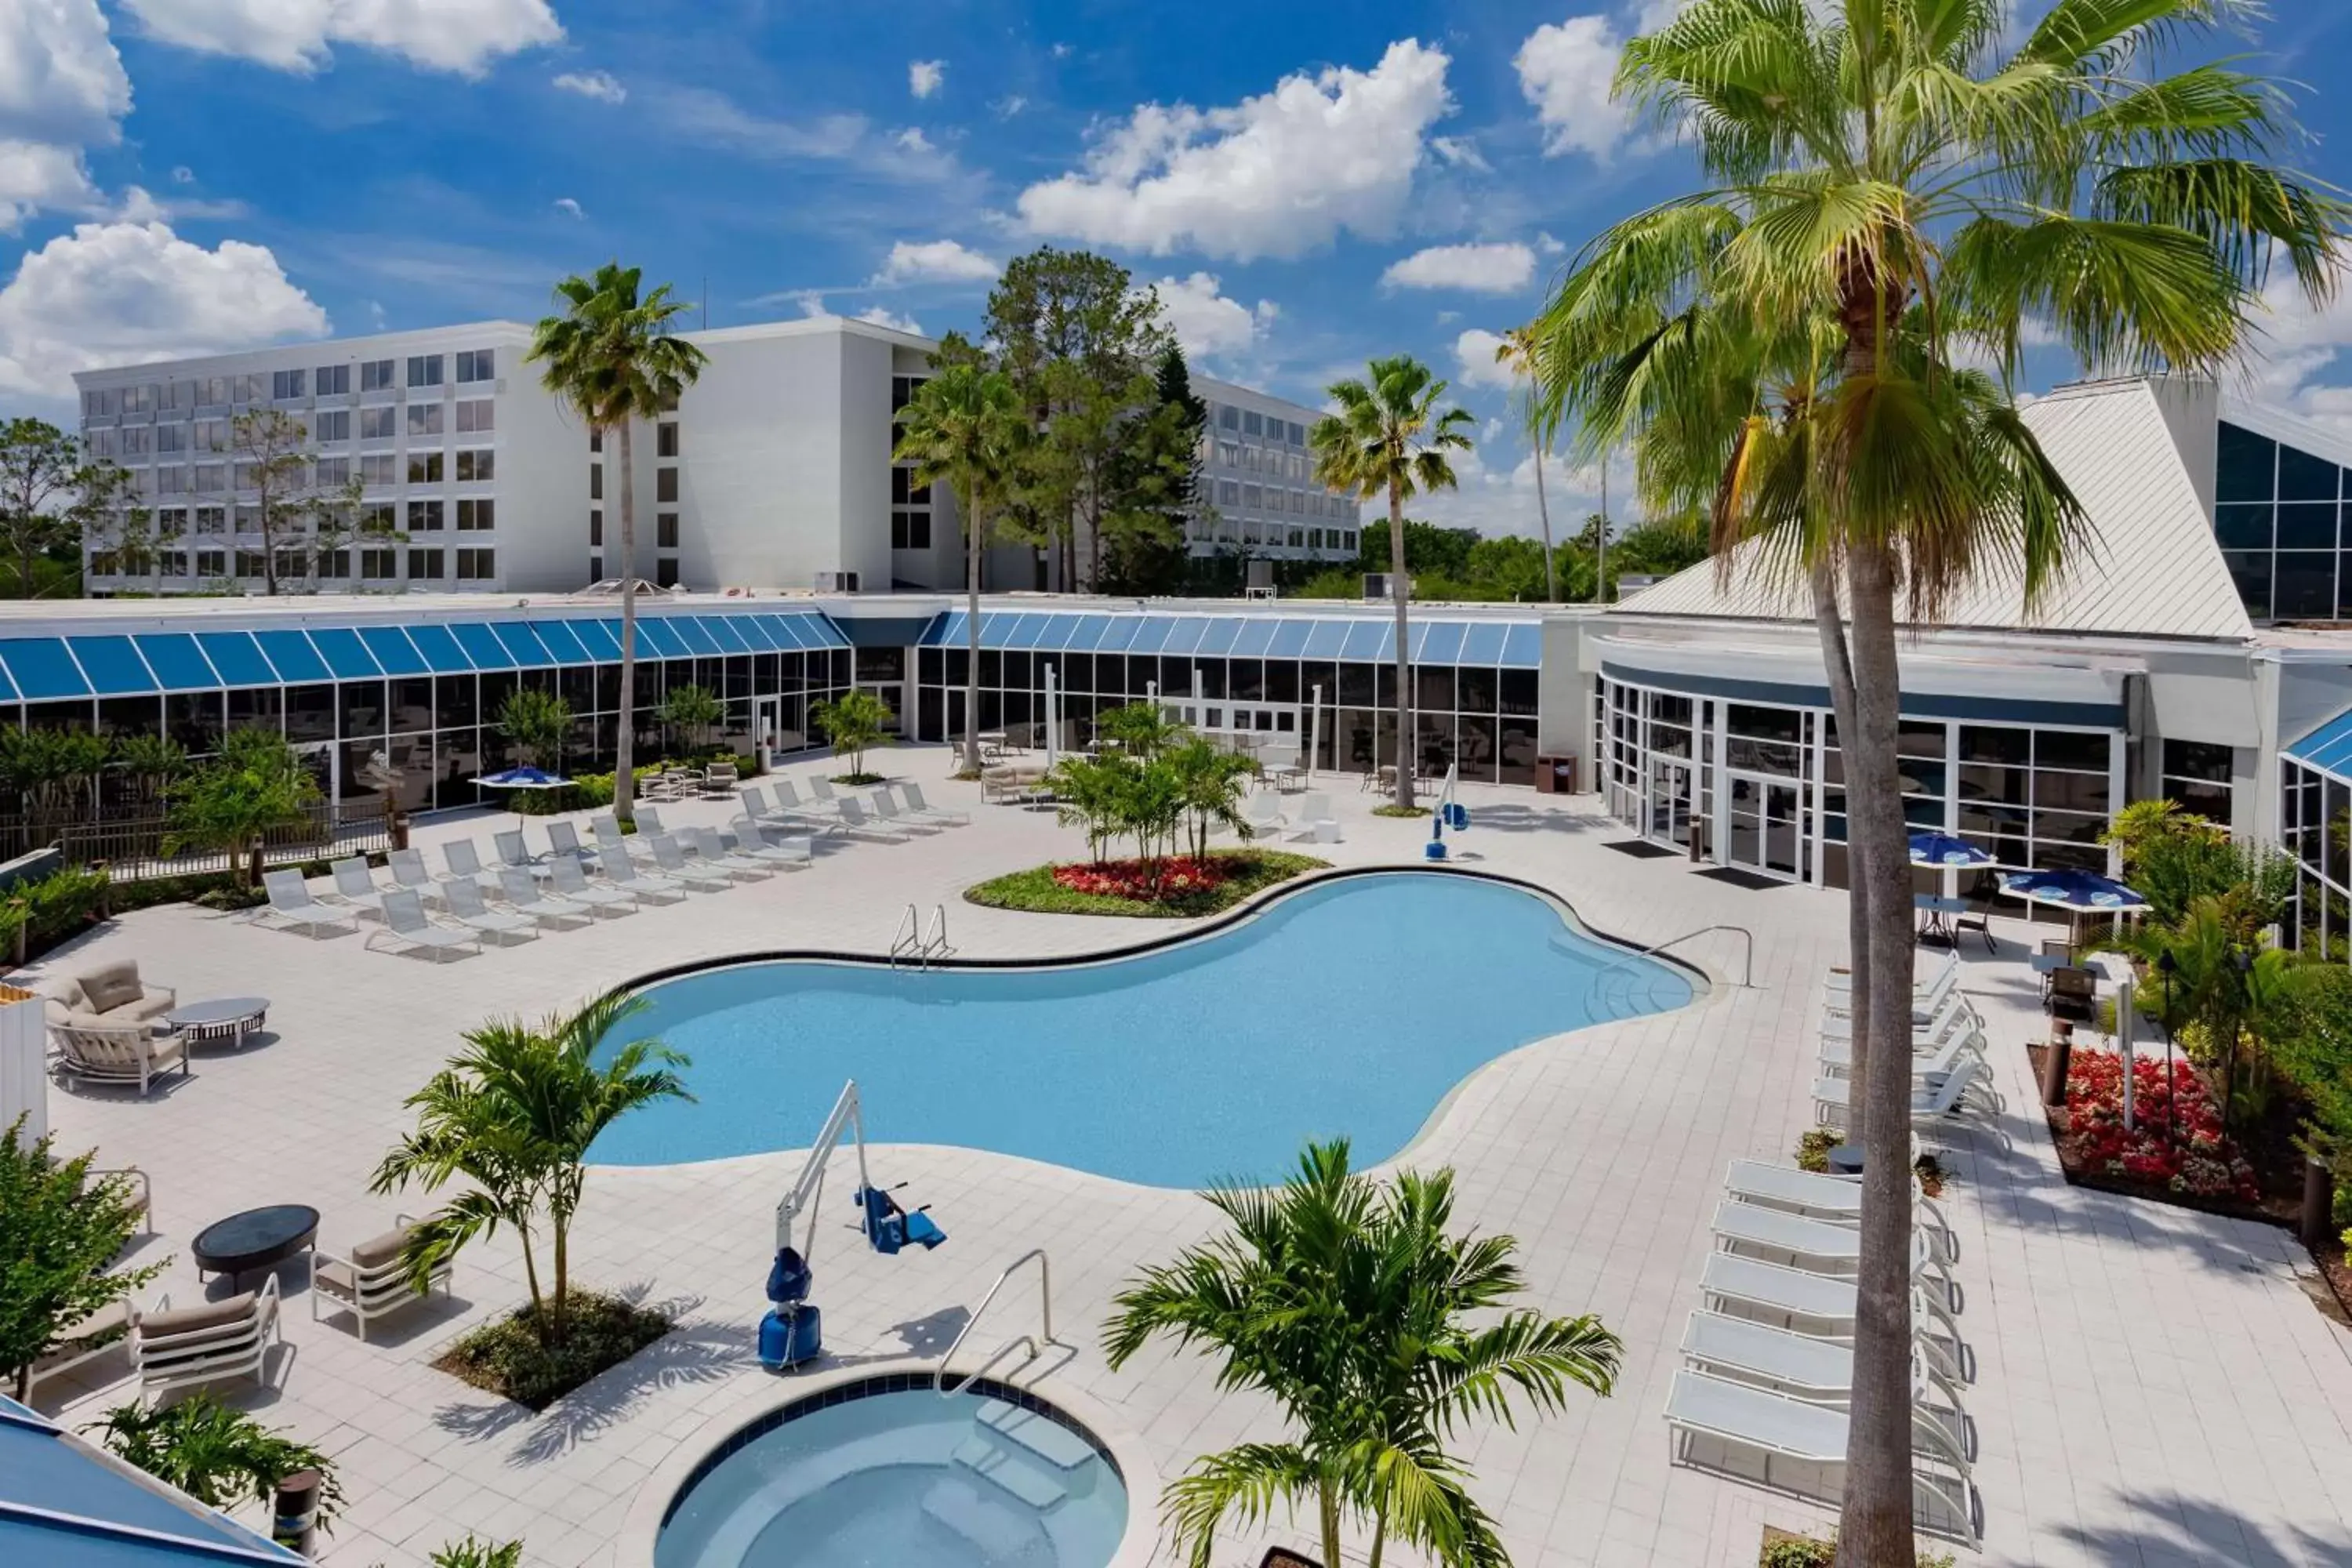 Activities, Pool View in Wyndham Orlando Resort & Conference Center, Celebration Area